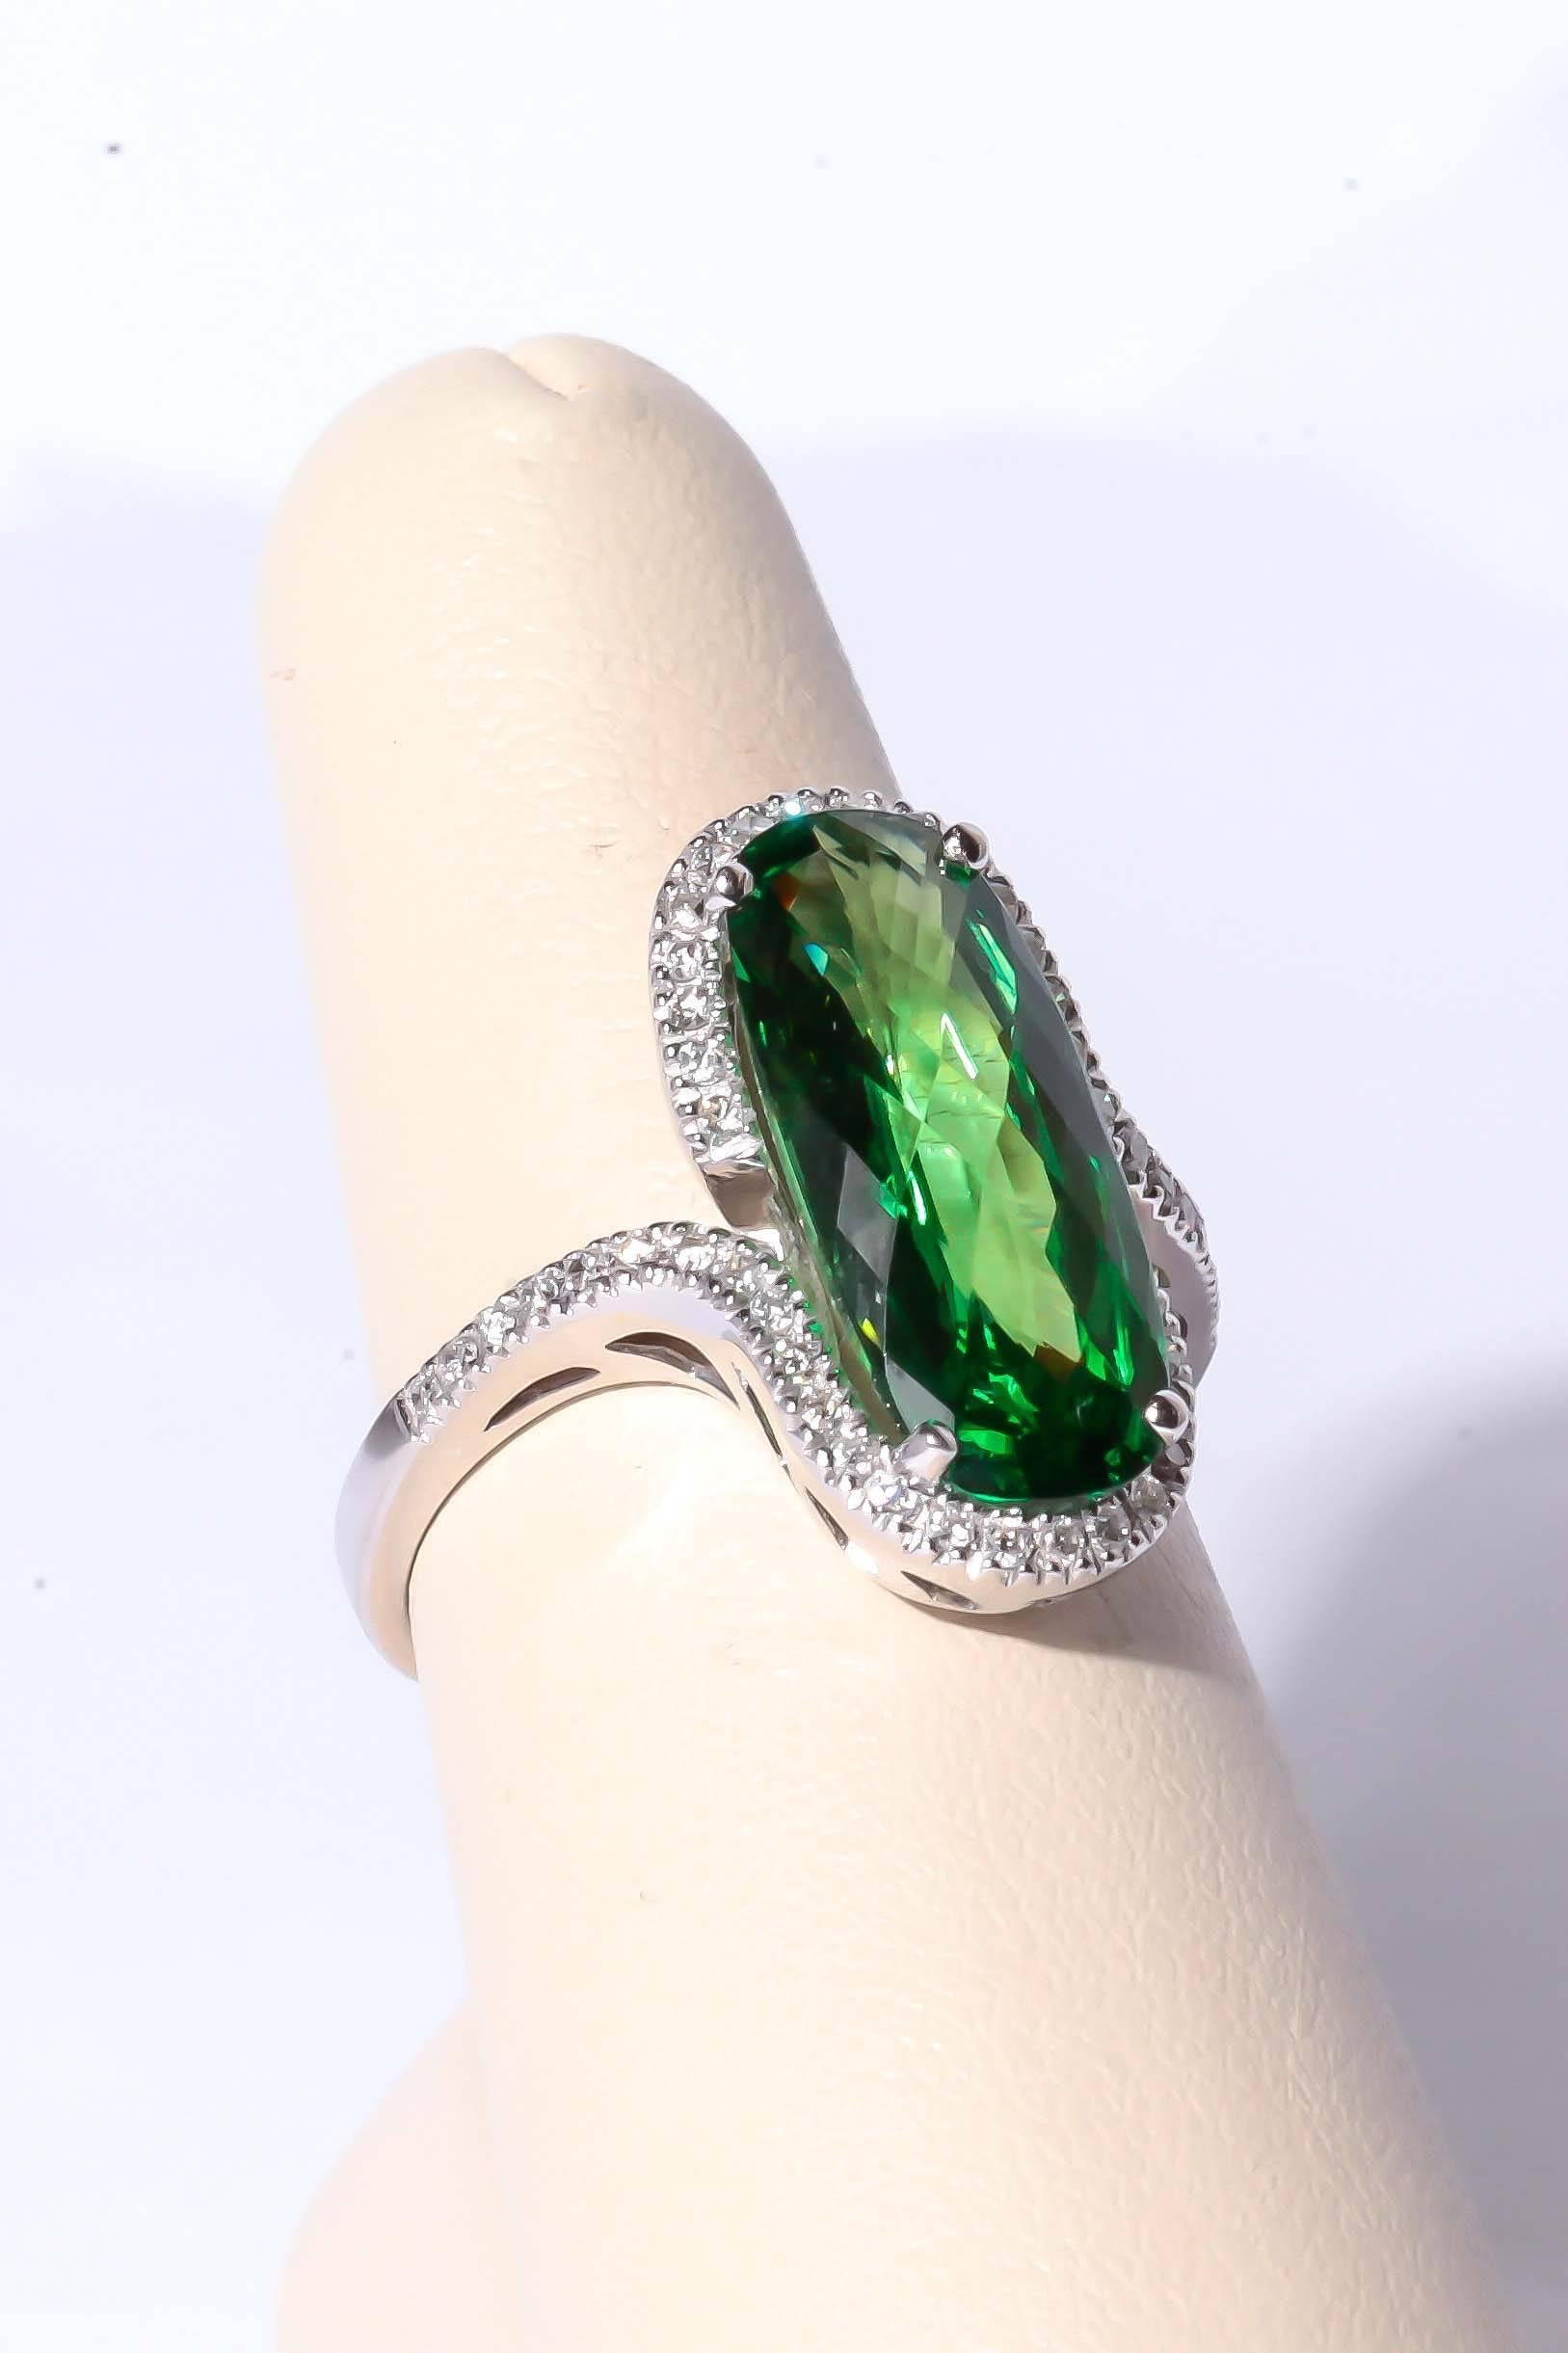 Tsavortie and diamond 18k white gold ring designed by Gadi. Ring is mounted with an usually large oval elongated tsavorite weighting approximately 5.62 carats the Tsavorite measures 18.19/7.74/5.09 mm Surrounding tsavorite are small diamonds in a